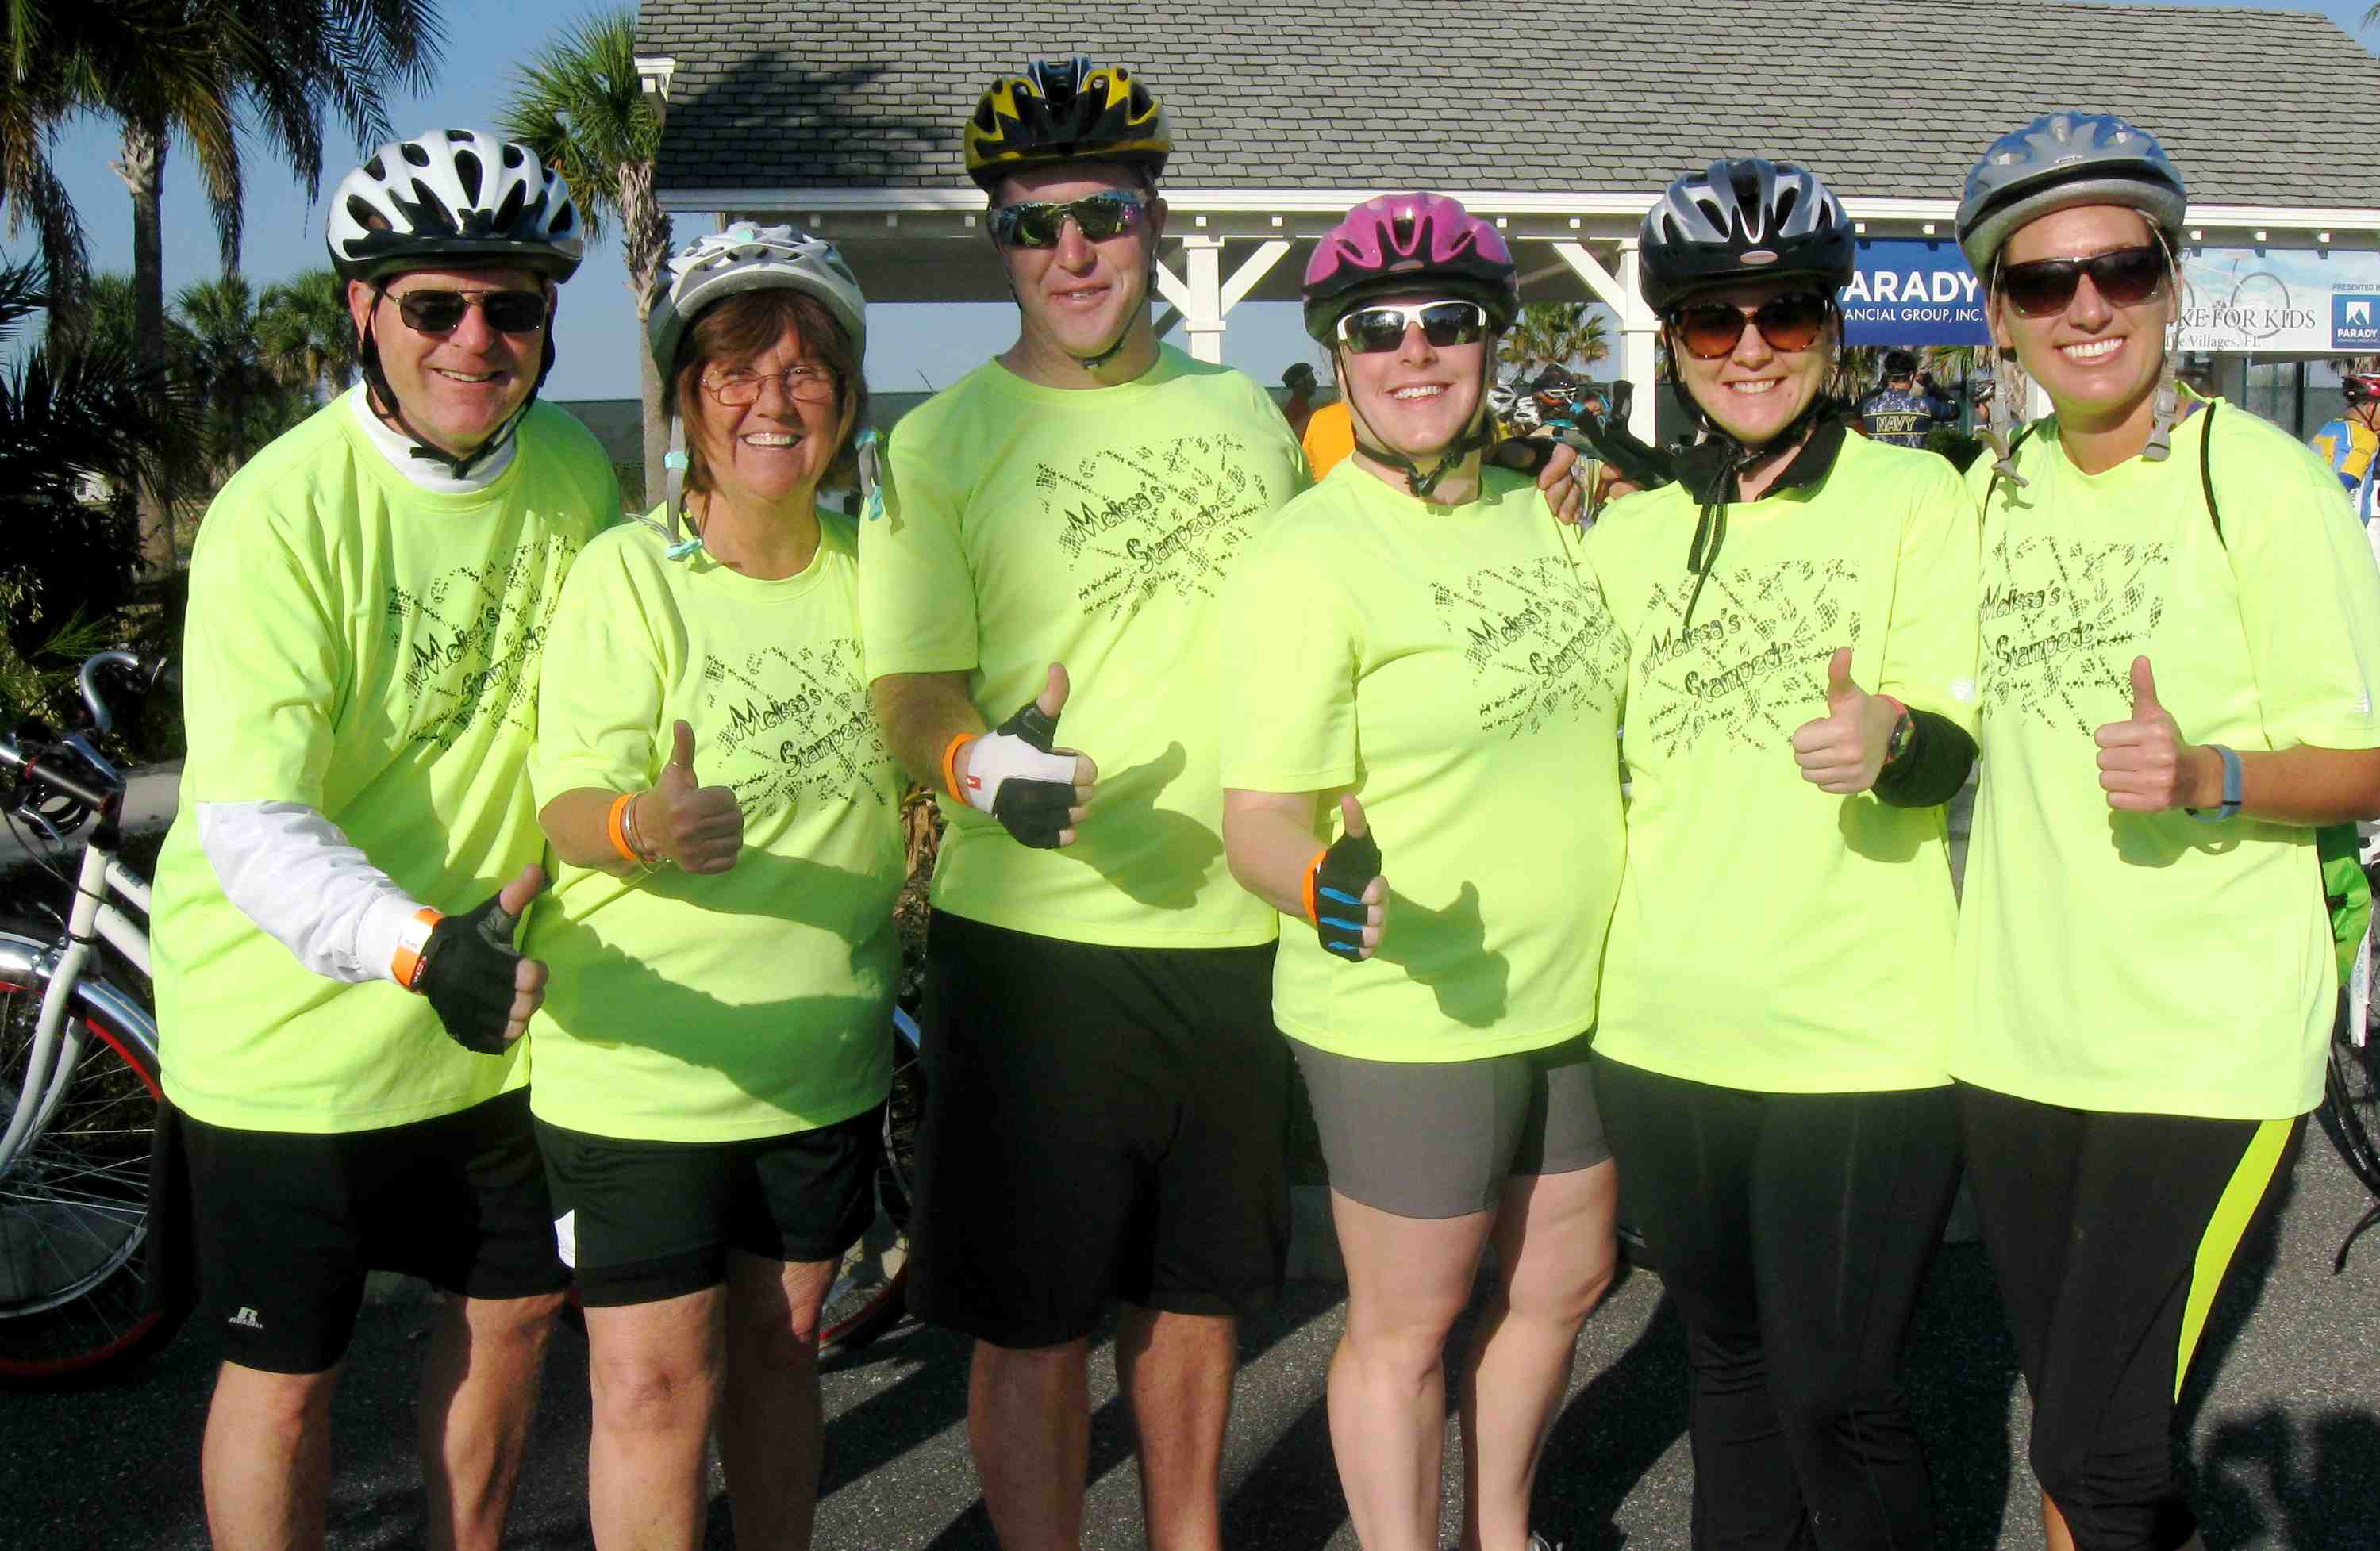 We Bike for Kids event scheduled for March 21 in The Villages